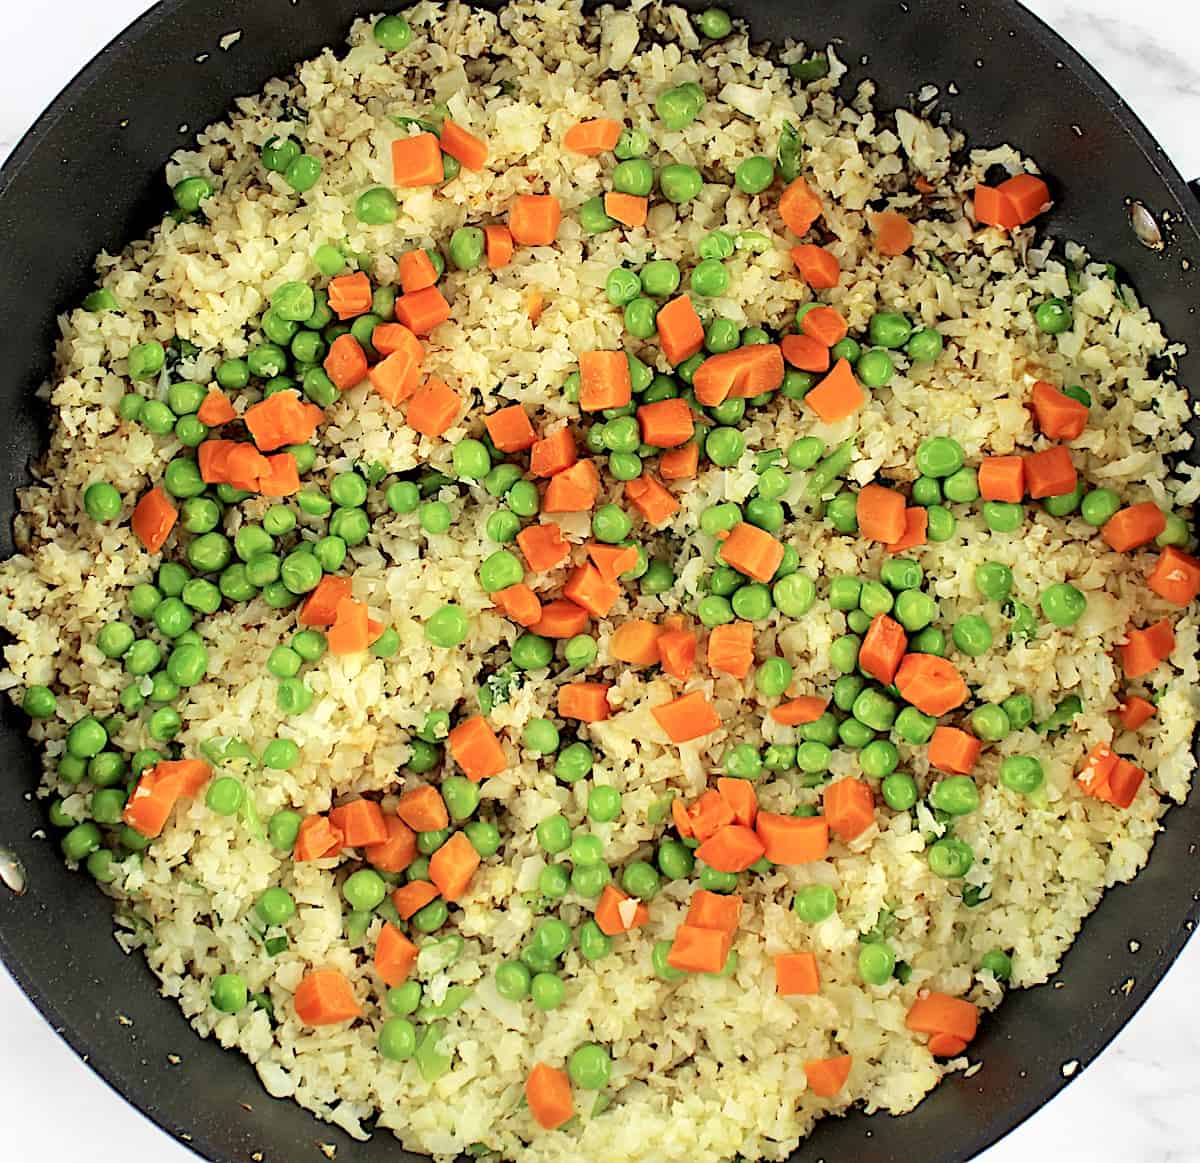 peas, carrots and cauliflower rice in skillet